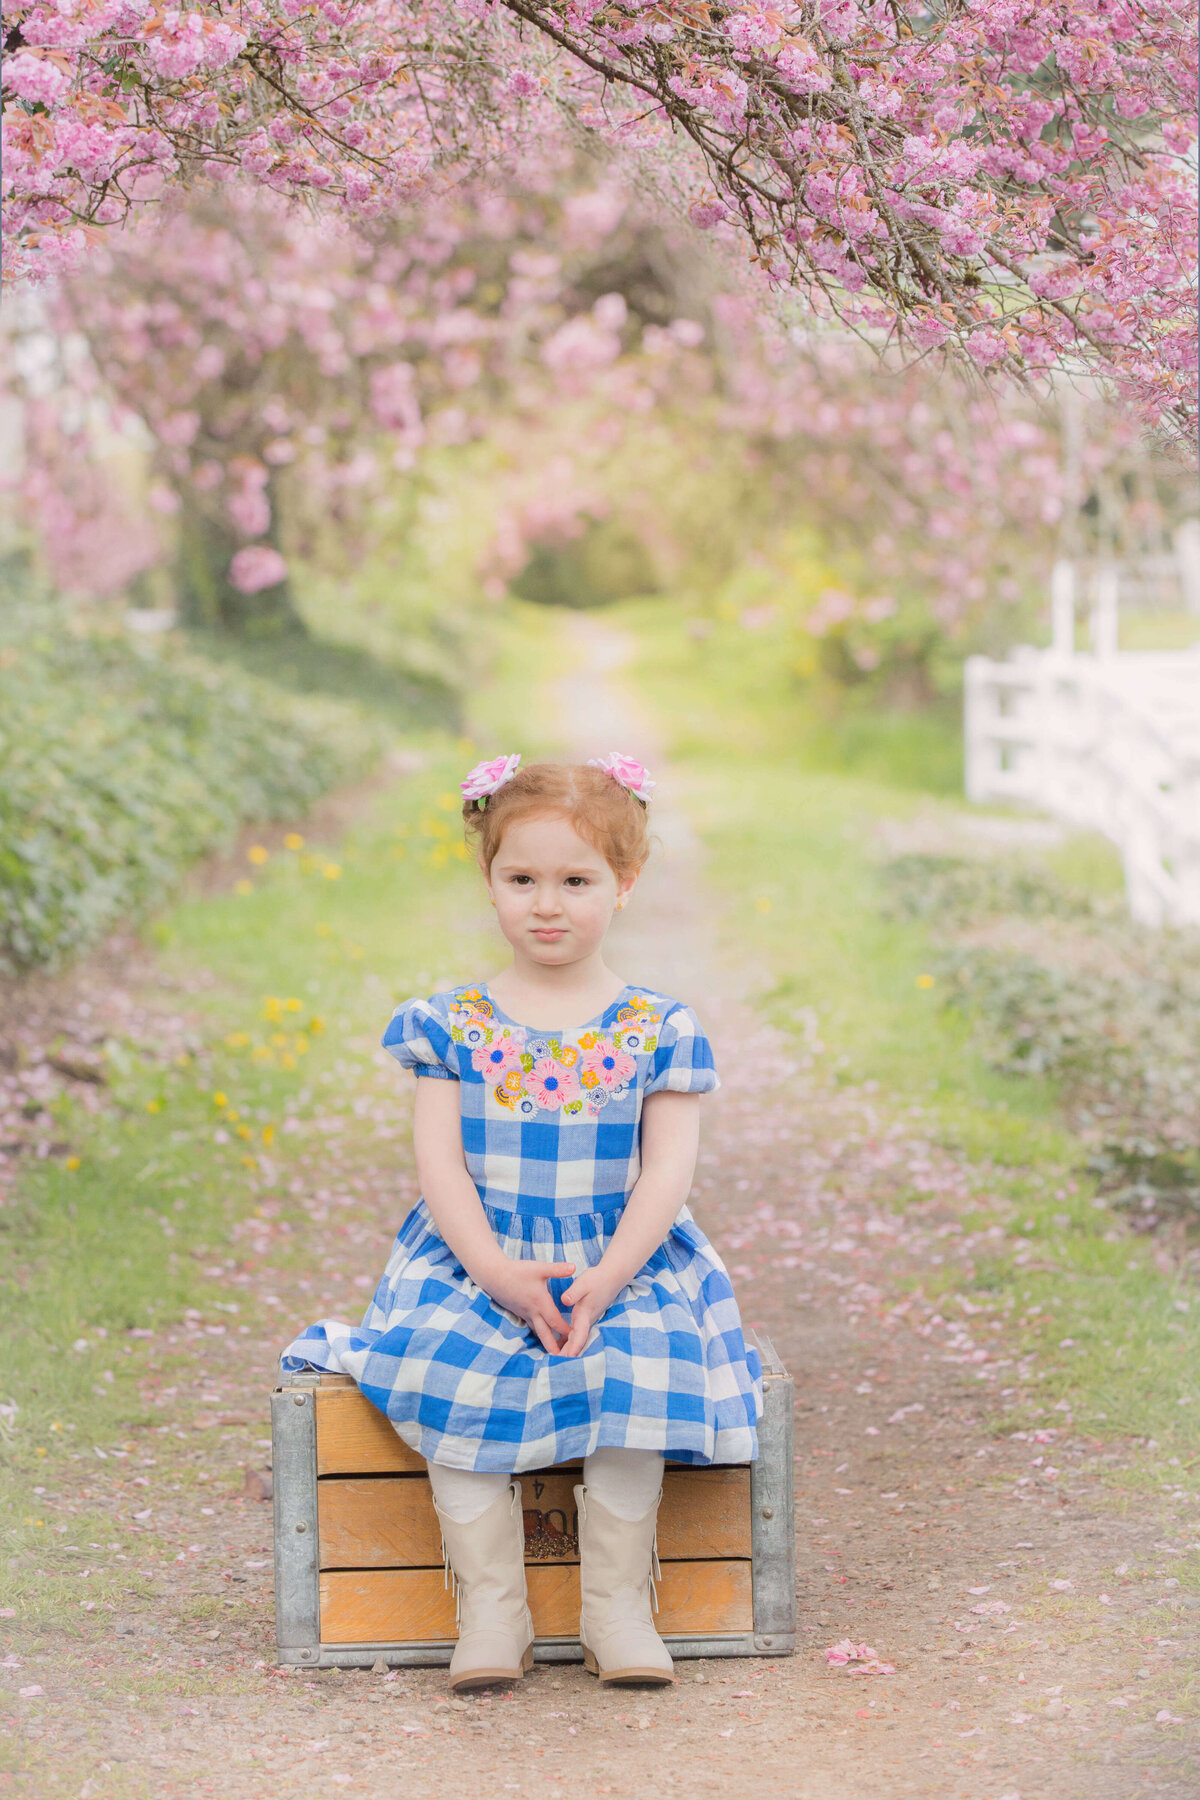 Little girl all dolled up in a archway of spring cherry blossoms